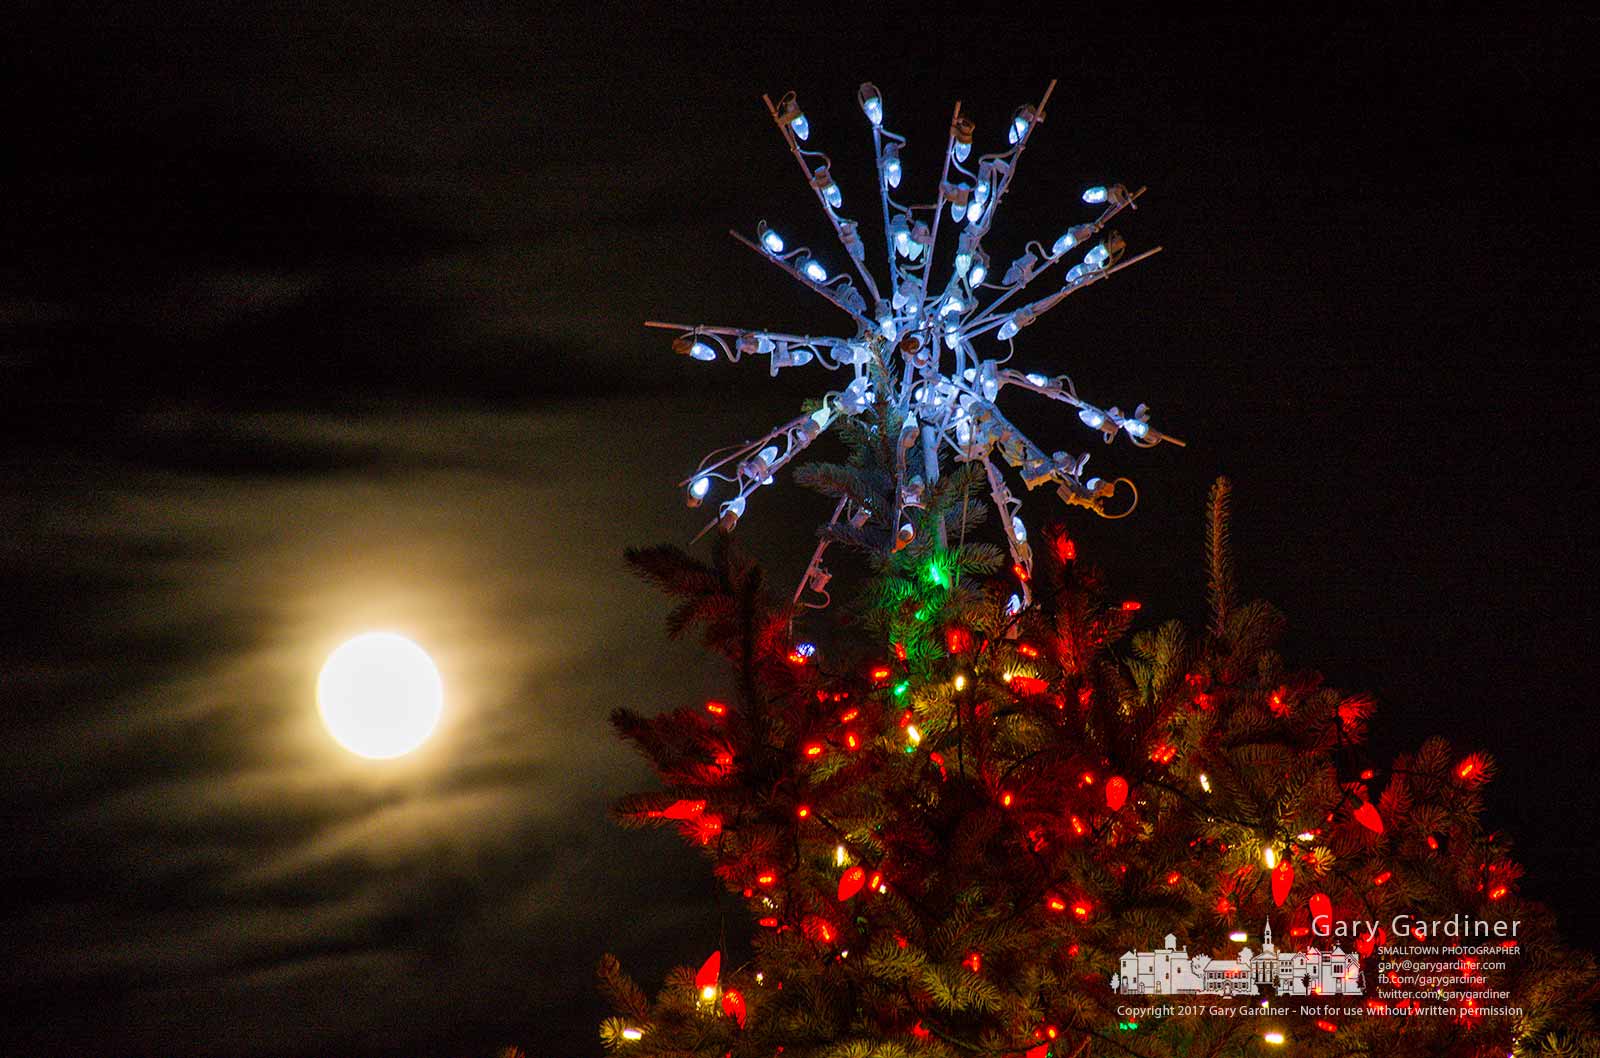 The near full moon slightly obscured by a cloud bank rises behind the star atop the holiday tree in the courtyard at city hall. My Final Photo for Dec. 2, 2017.